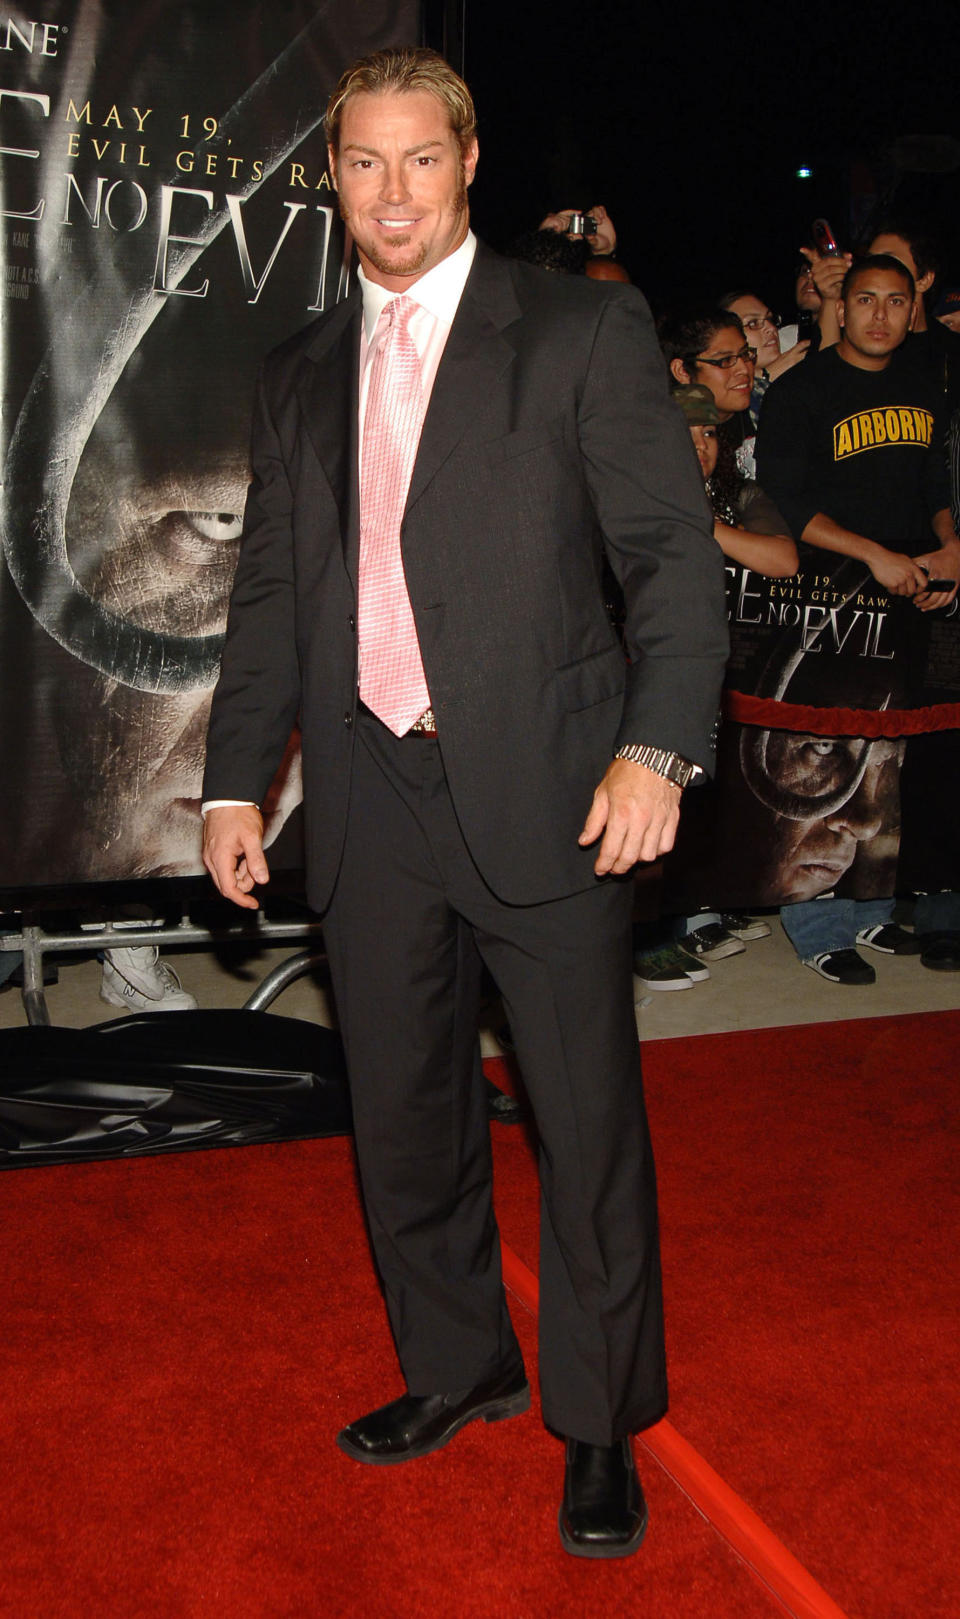 Rob Conway, WWE Raw Superstar during 'See No Evil' Premiere - Arrivals in Los Angeles, California, United States. (Photo by J.Sciulli/WireImage for LIONSGATE)